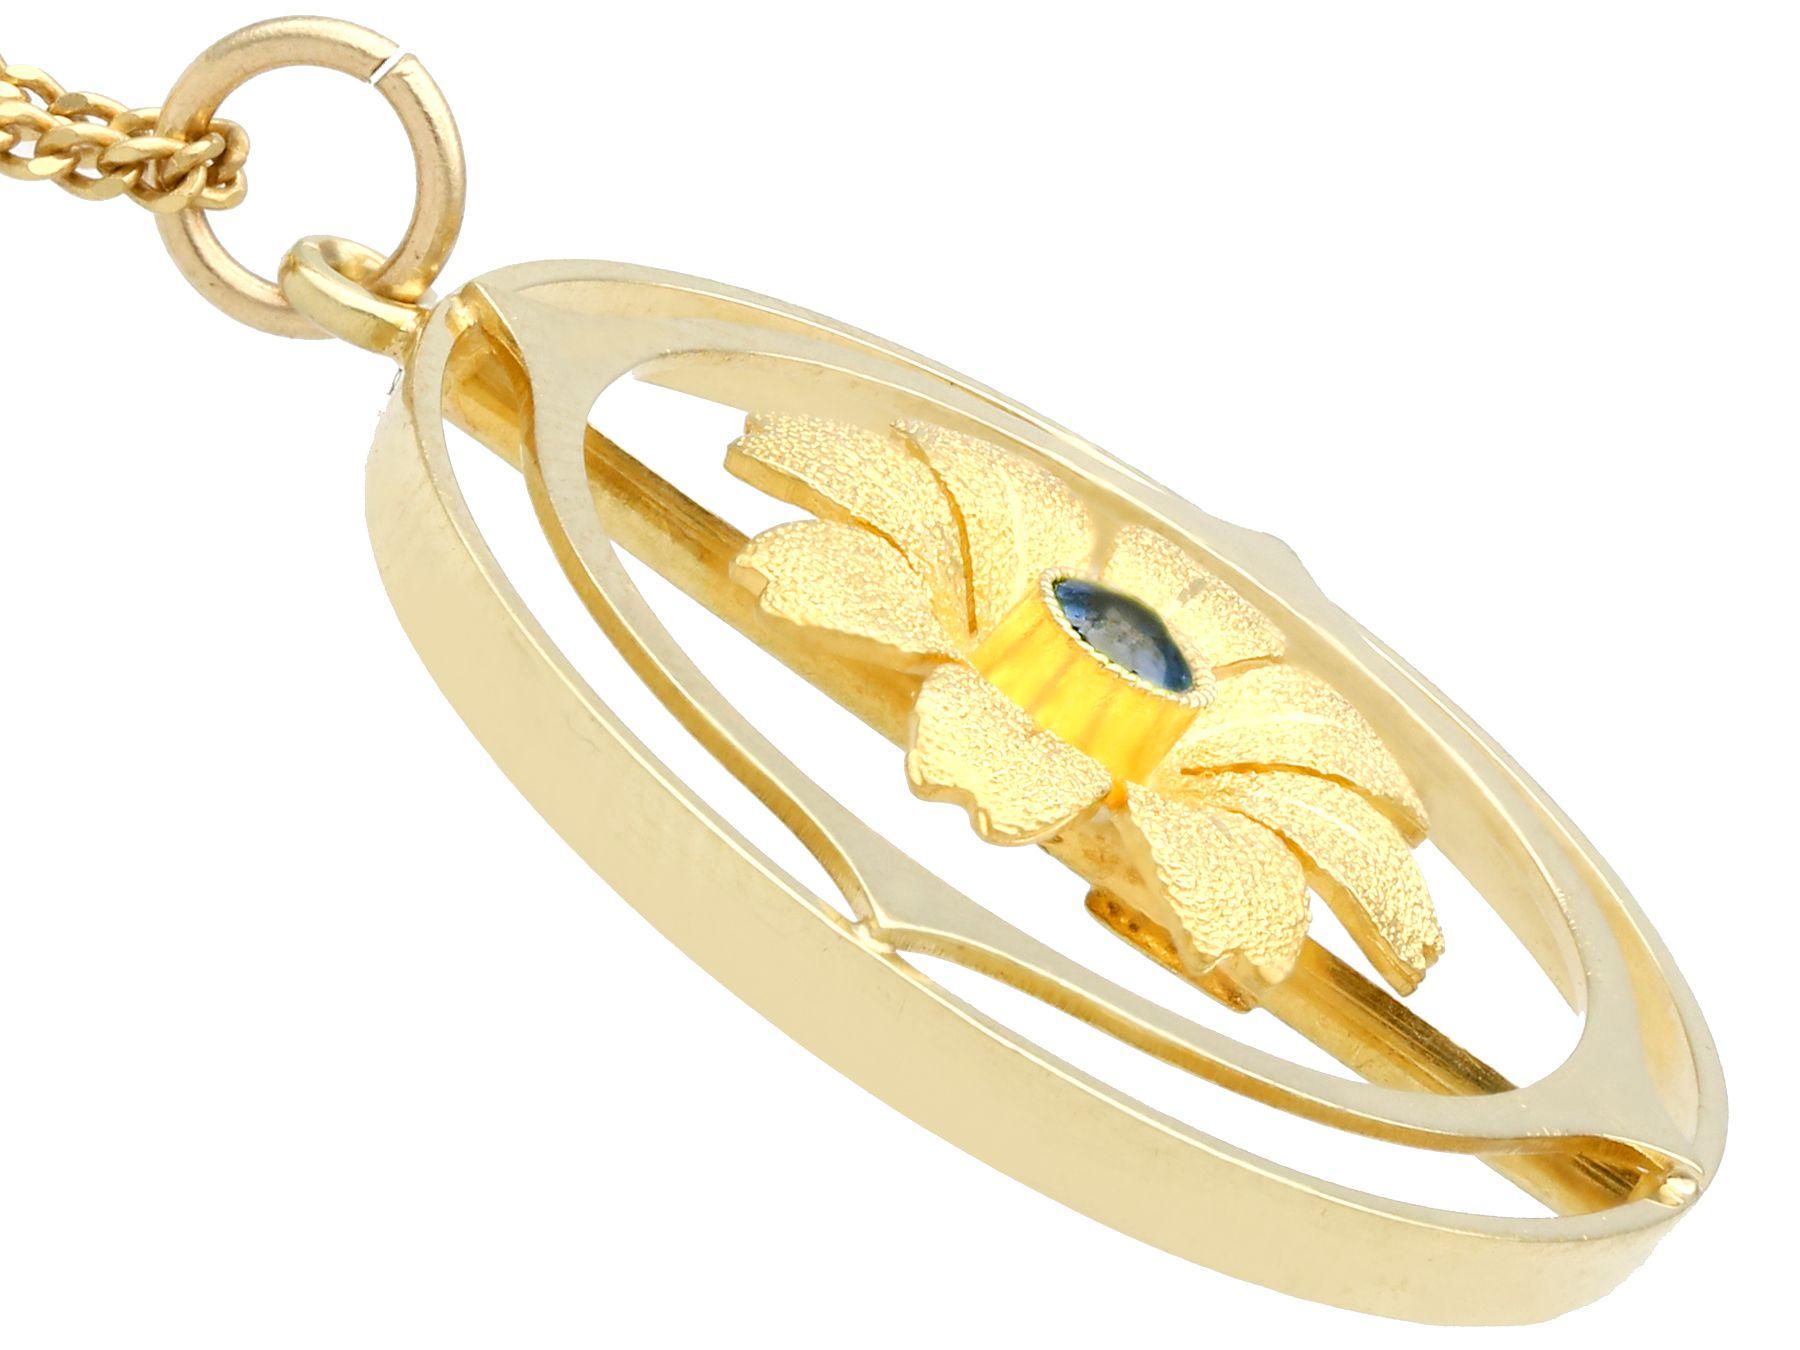 Antique Sapphire Yellow Gold Pendant In Excellent Condition For Sale In Jesmond, Newcastle Upon Tyne